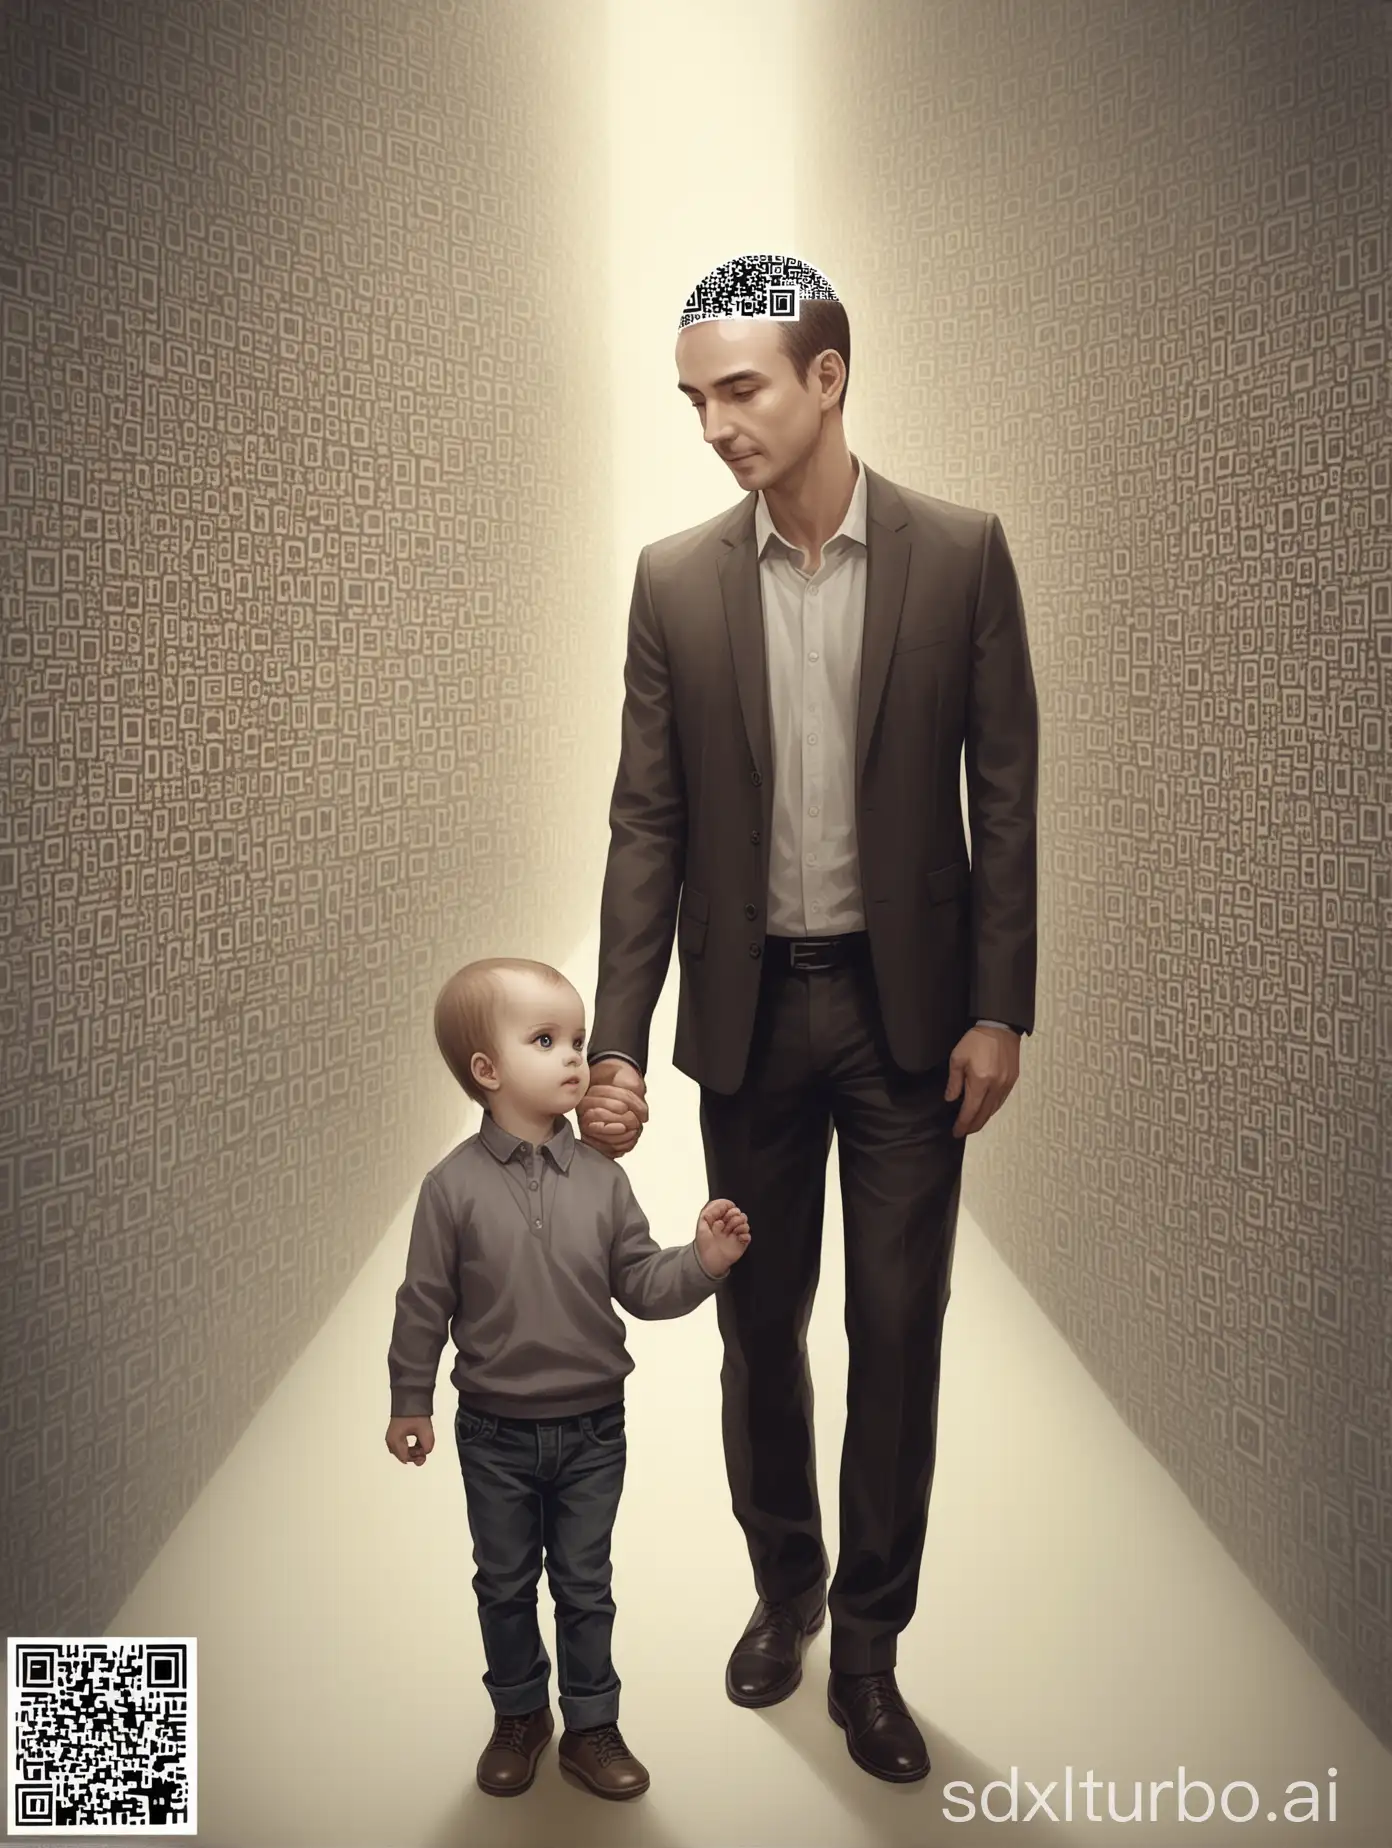 Generate an artistic image of a man holding a child’s hand, with a QR code on his forehead. The scene should depict a family, with the QR code standing out clearly on the man's head